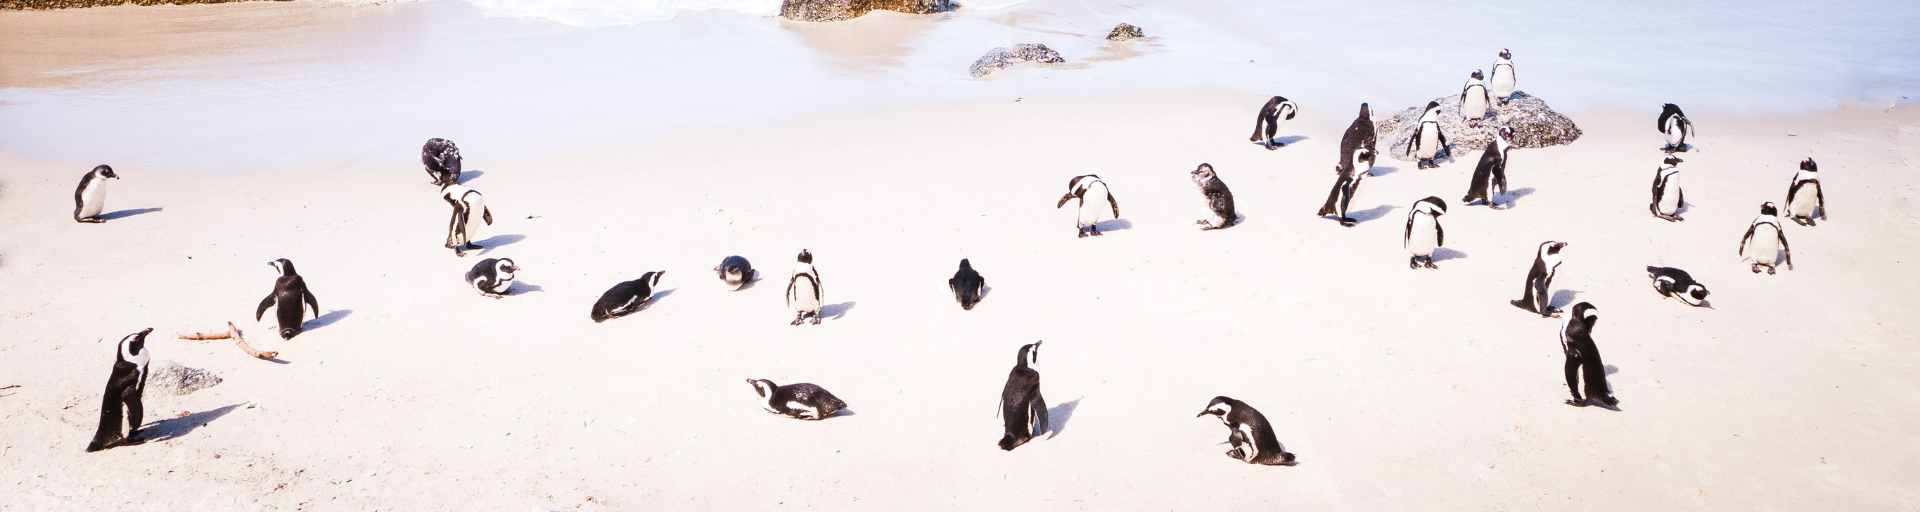 Penguins in Cape Town on the Global Network Program